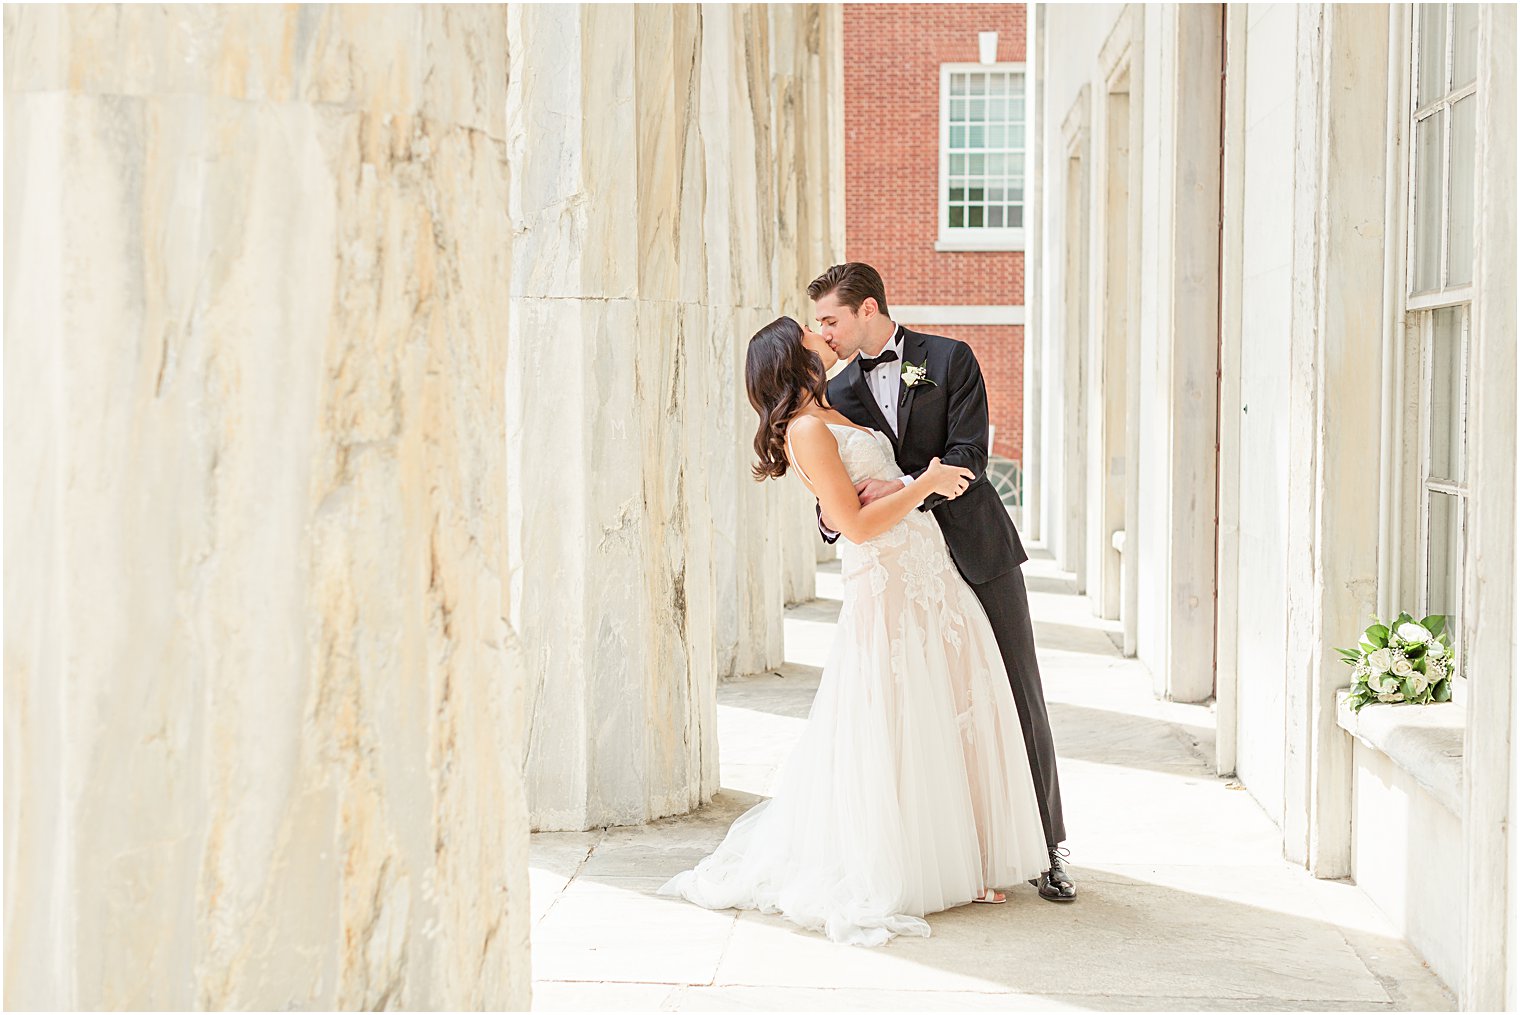 Bride + Groom kiss outside building during first look at Philadelphia PA Wedding at Franklin Square  